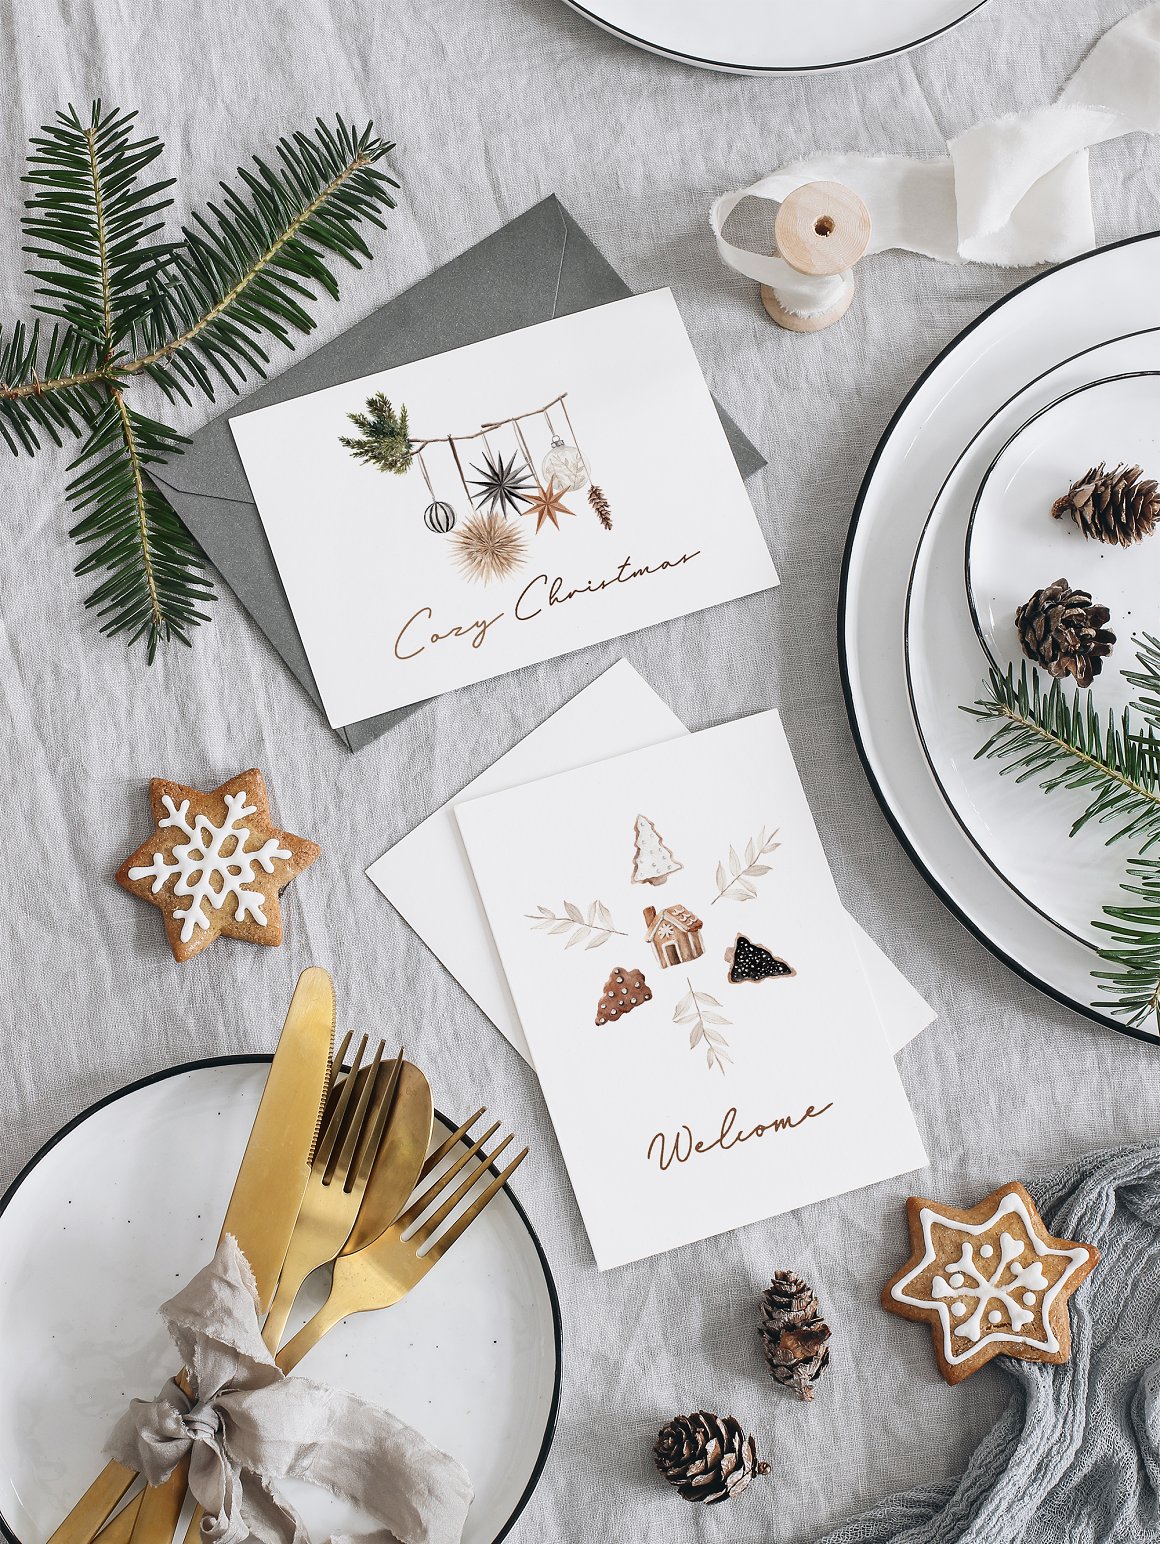 3 white greeting card with "Cozy Christmas" and "Welcome" lettering and gray envelope.